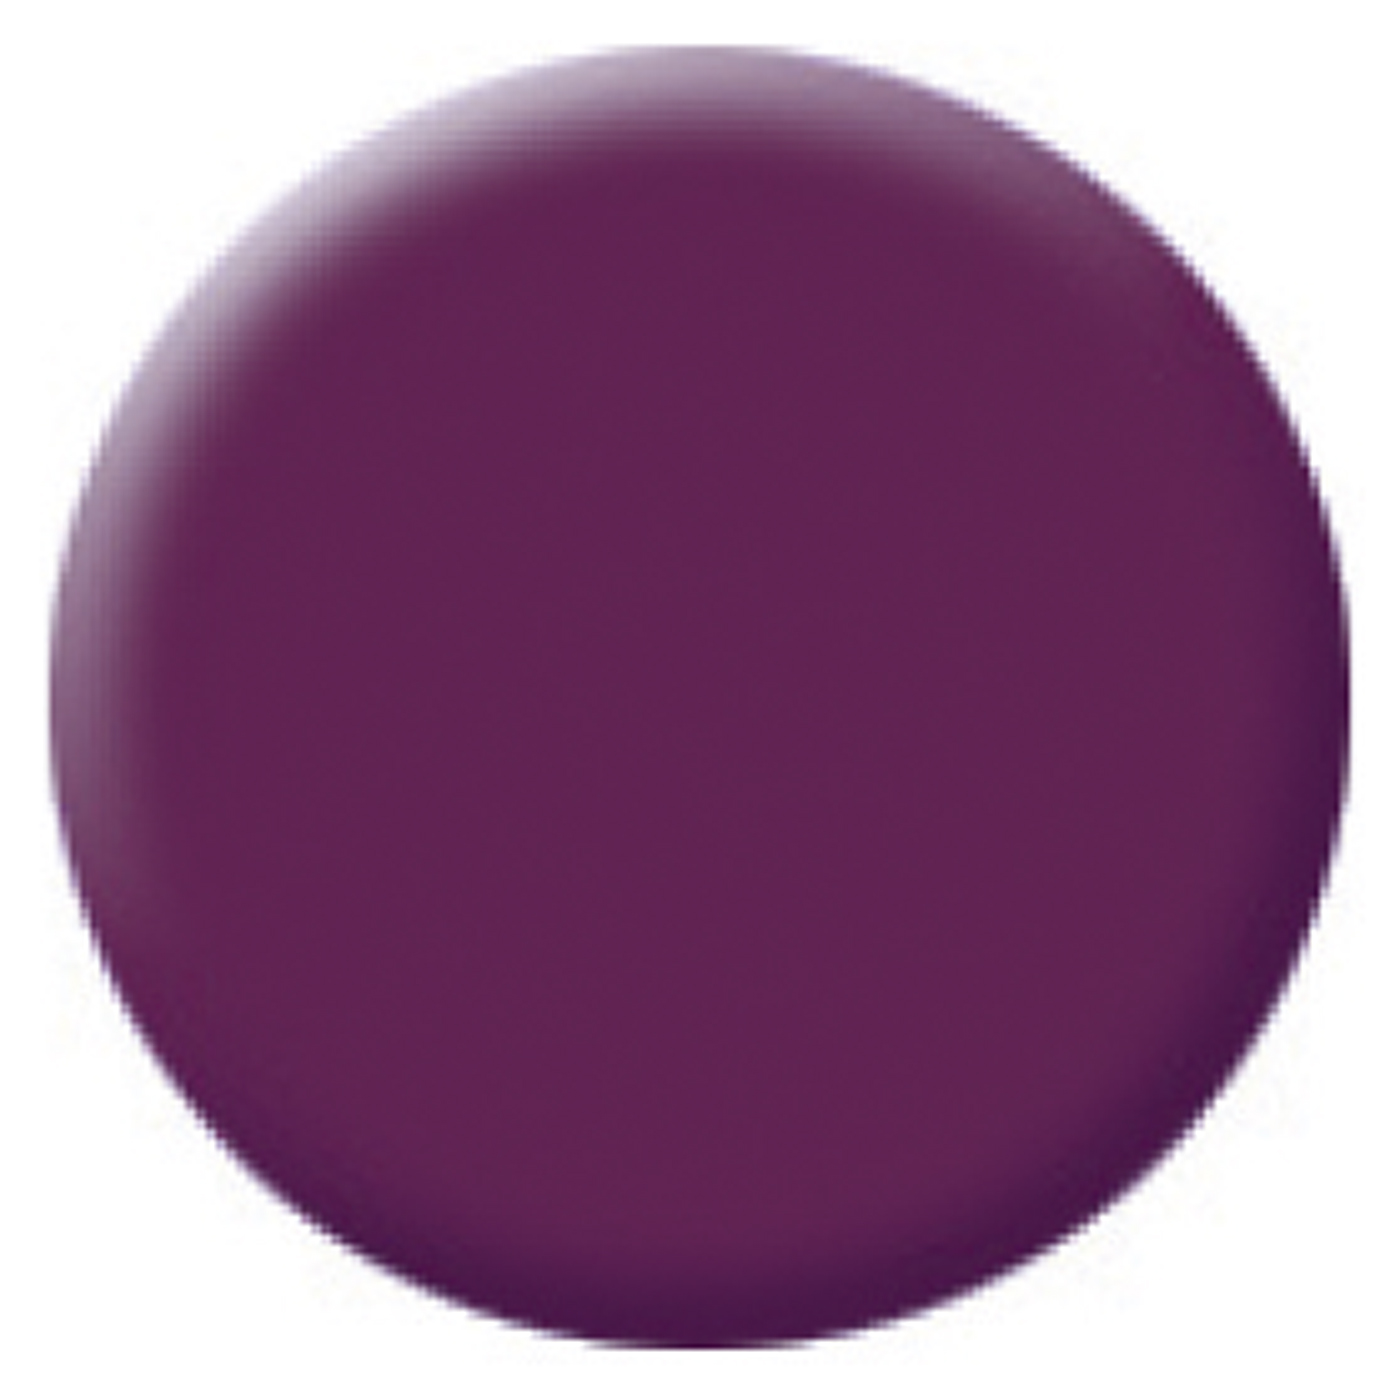 Colorit Trend opaque, blueberry - 5 g